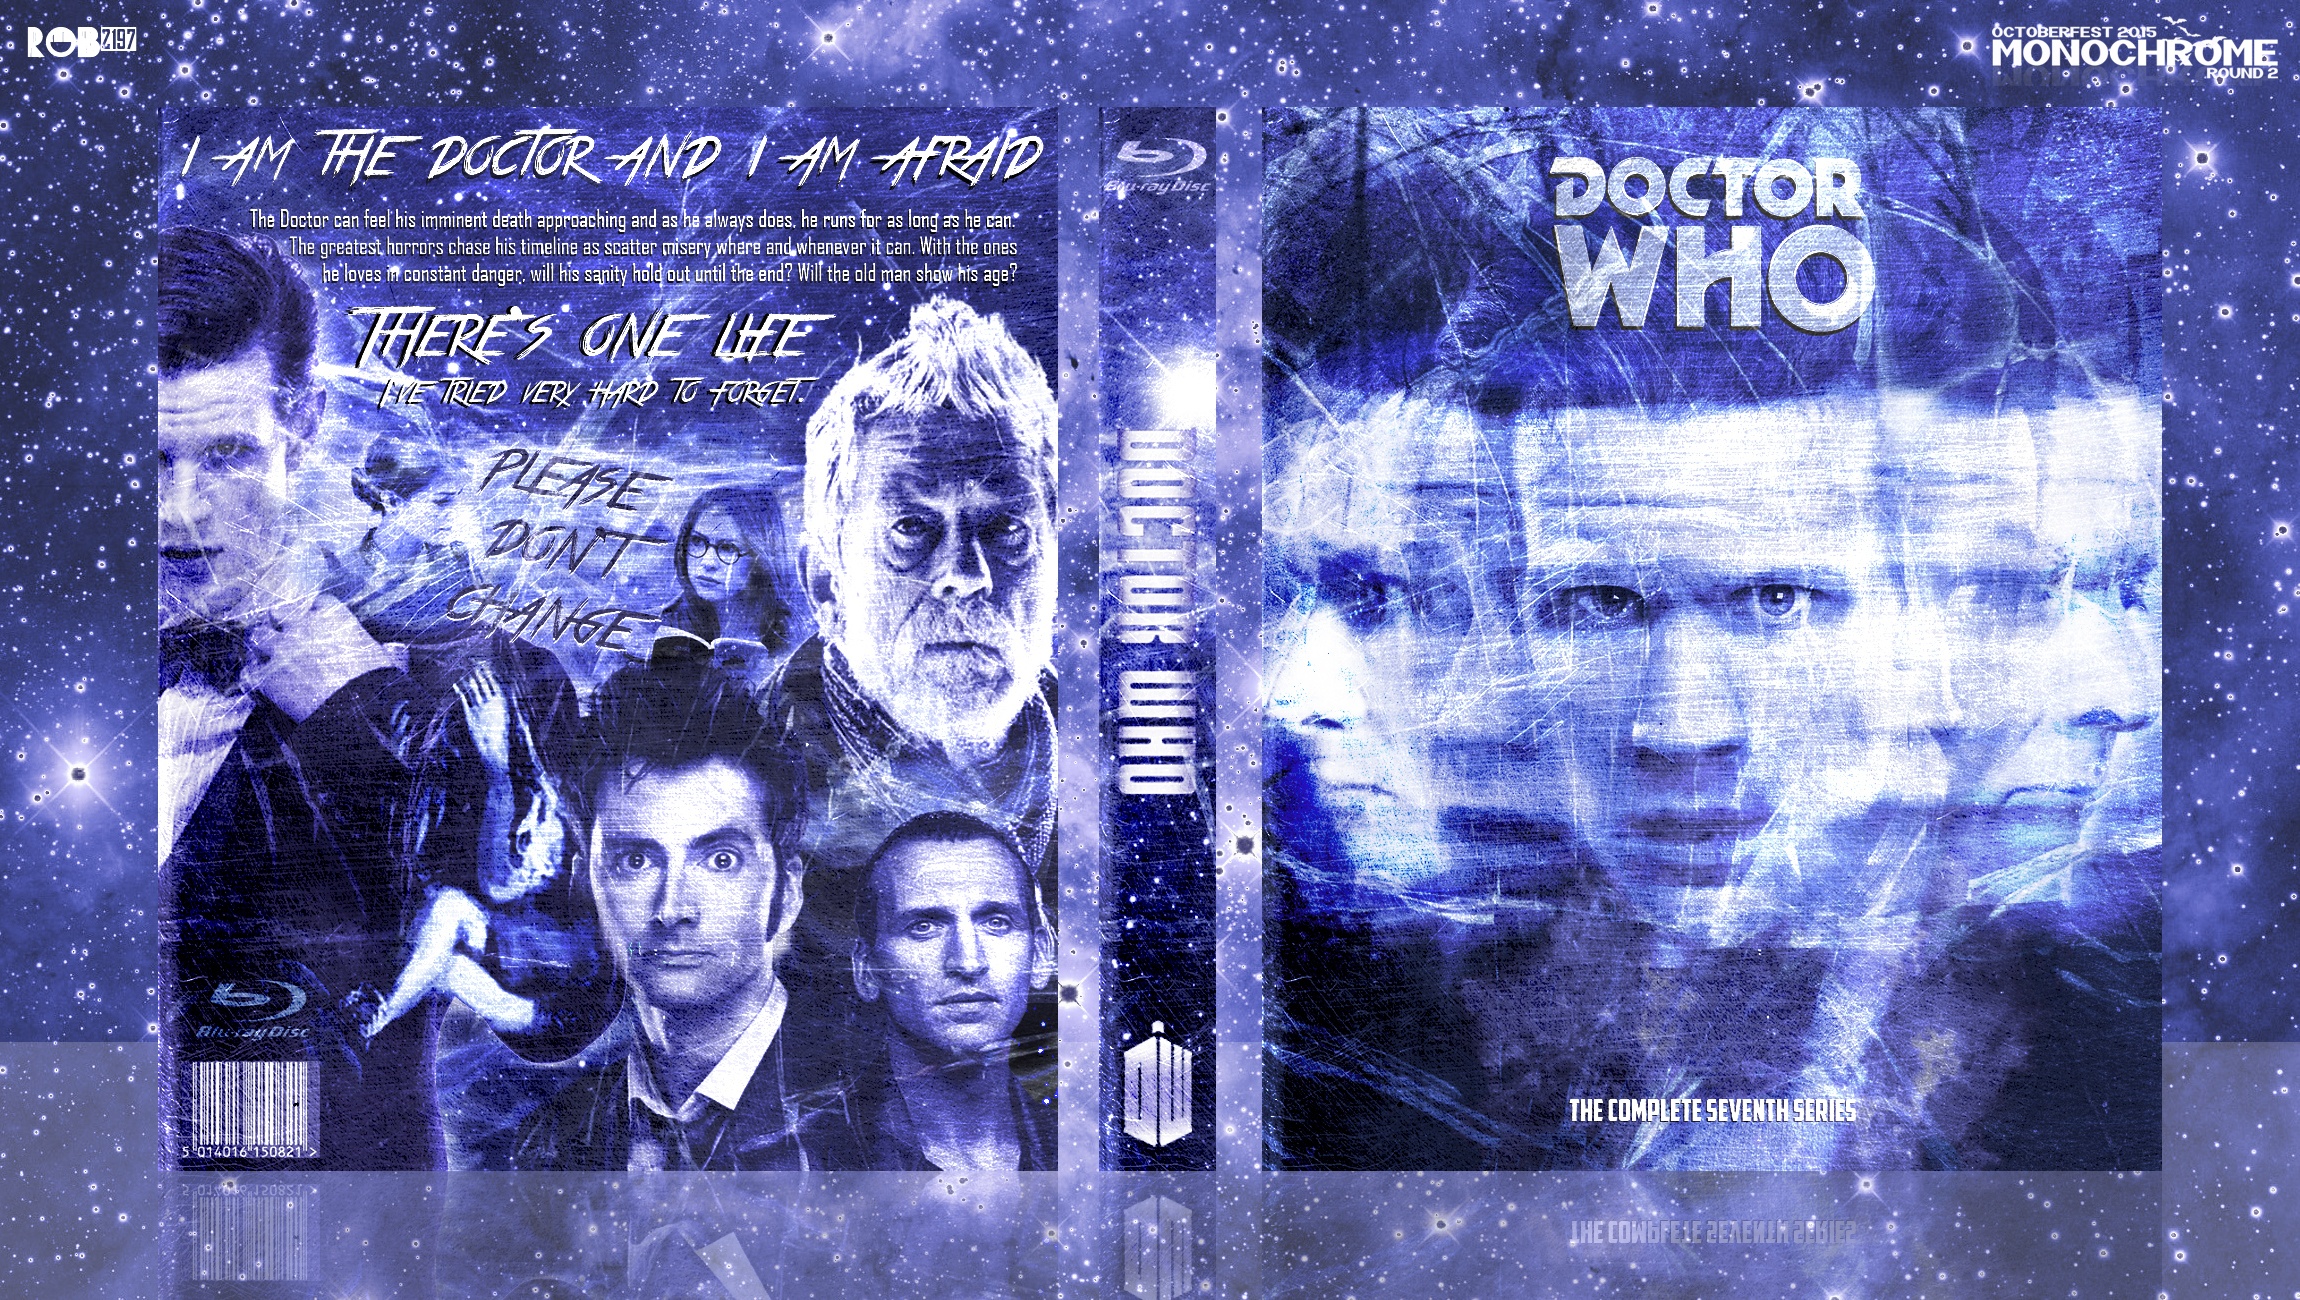 Doctor Who: Series 7 box cover